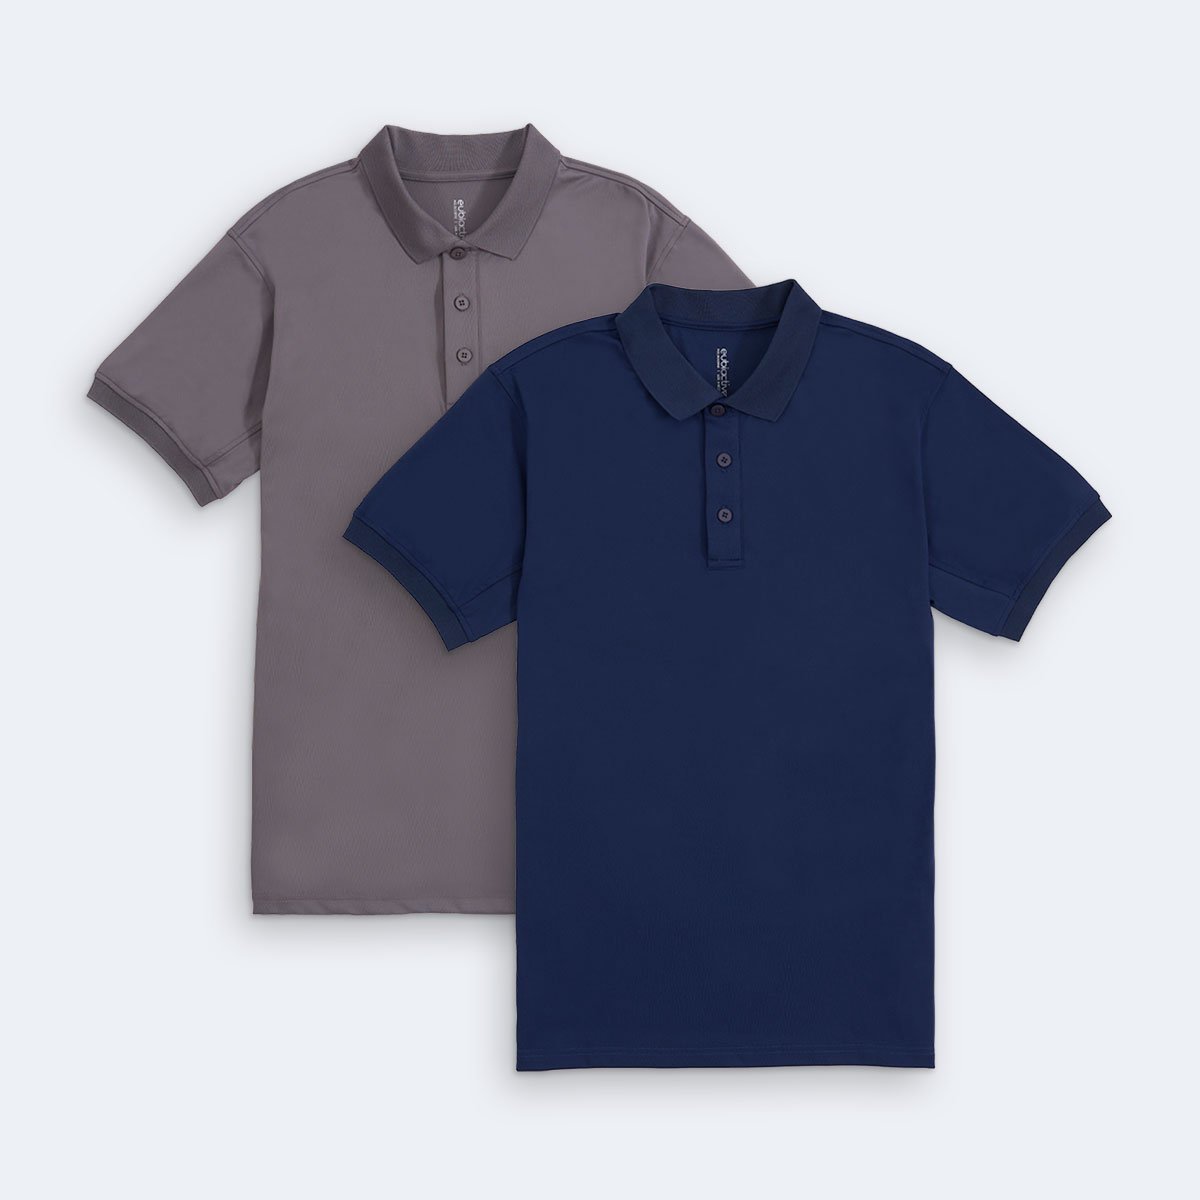 [CLEARANCE] Solid Grey + Navy Blue Featherlite Wrinkle Resistant Performance Polo Duo Pack